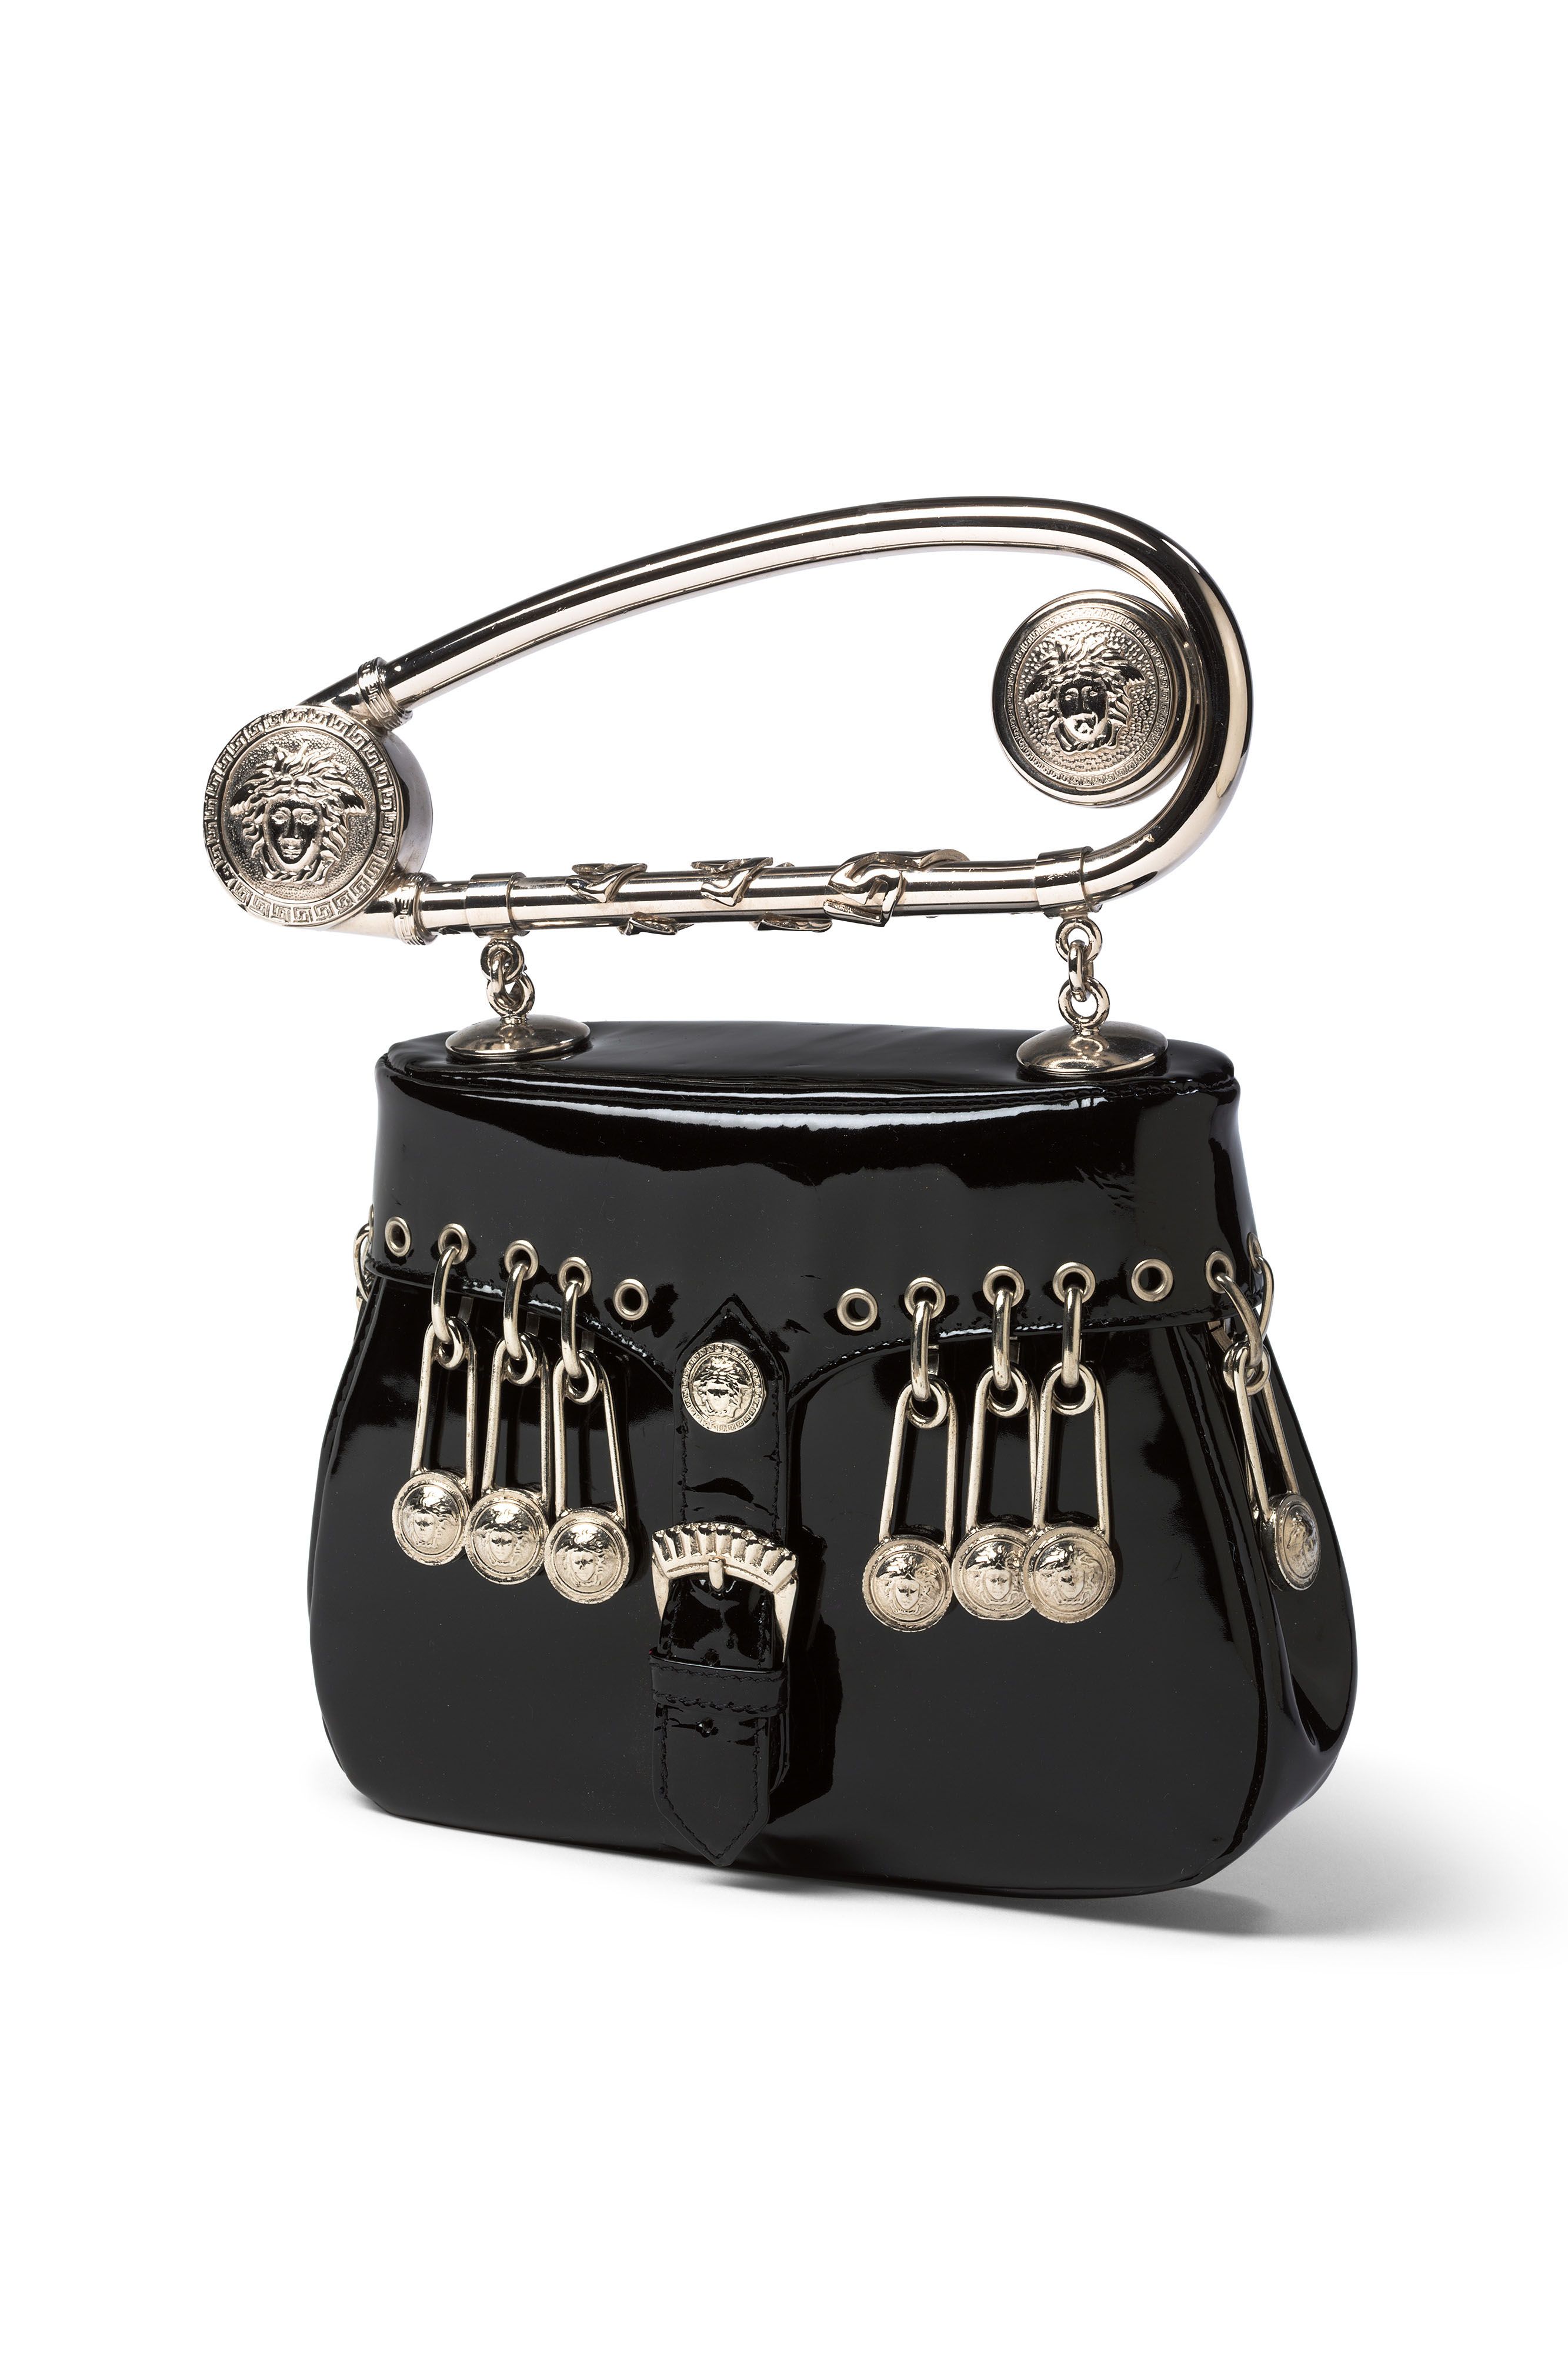 Some of the world's most iconic handbags are on show in a new exhibition